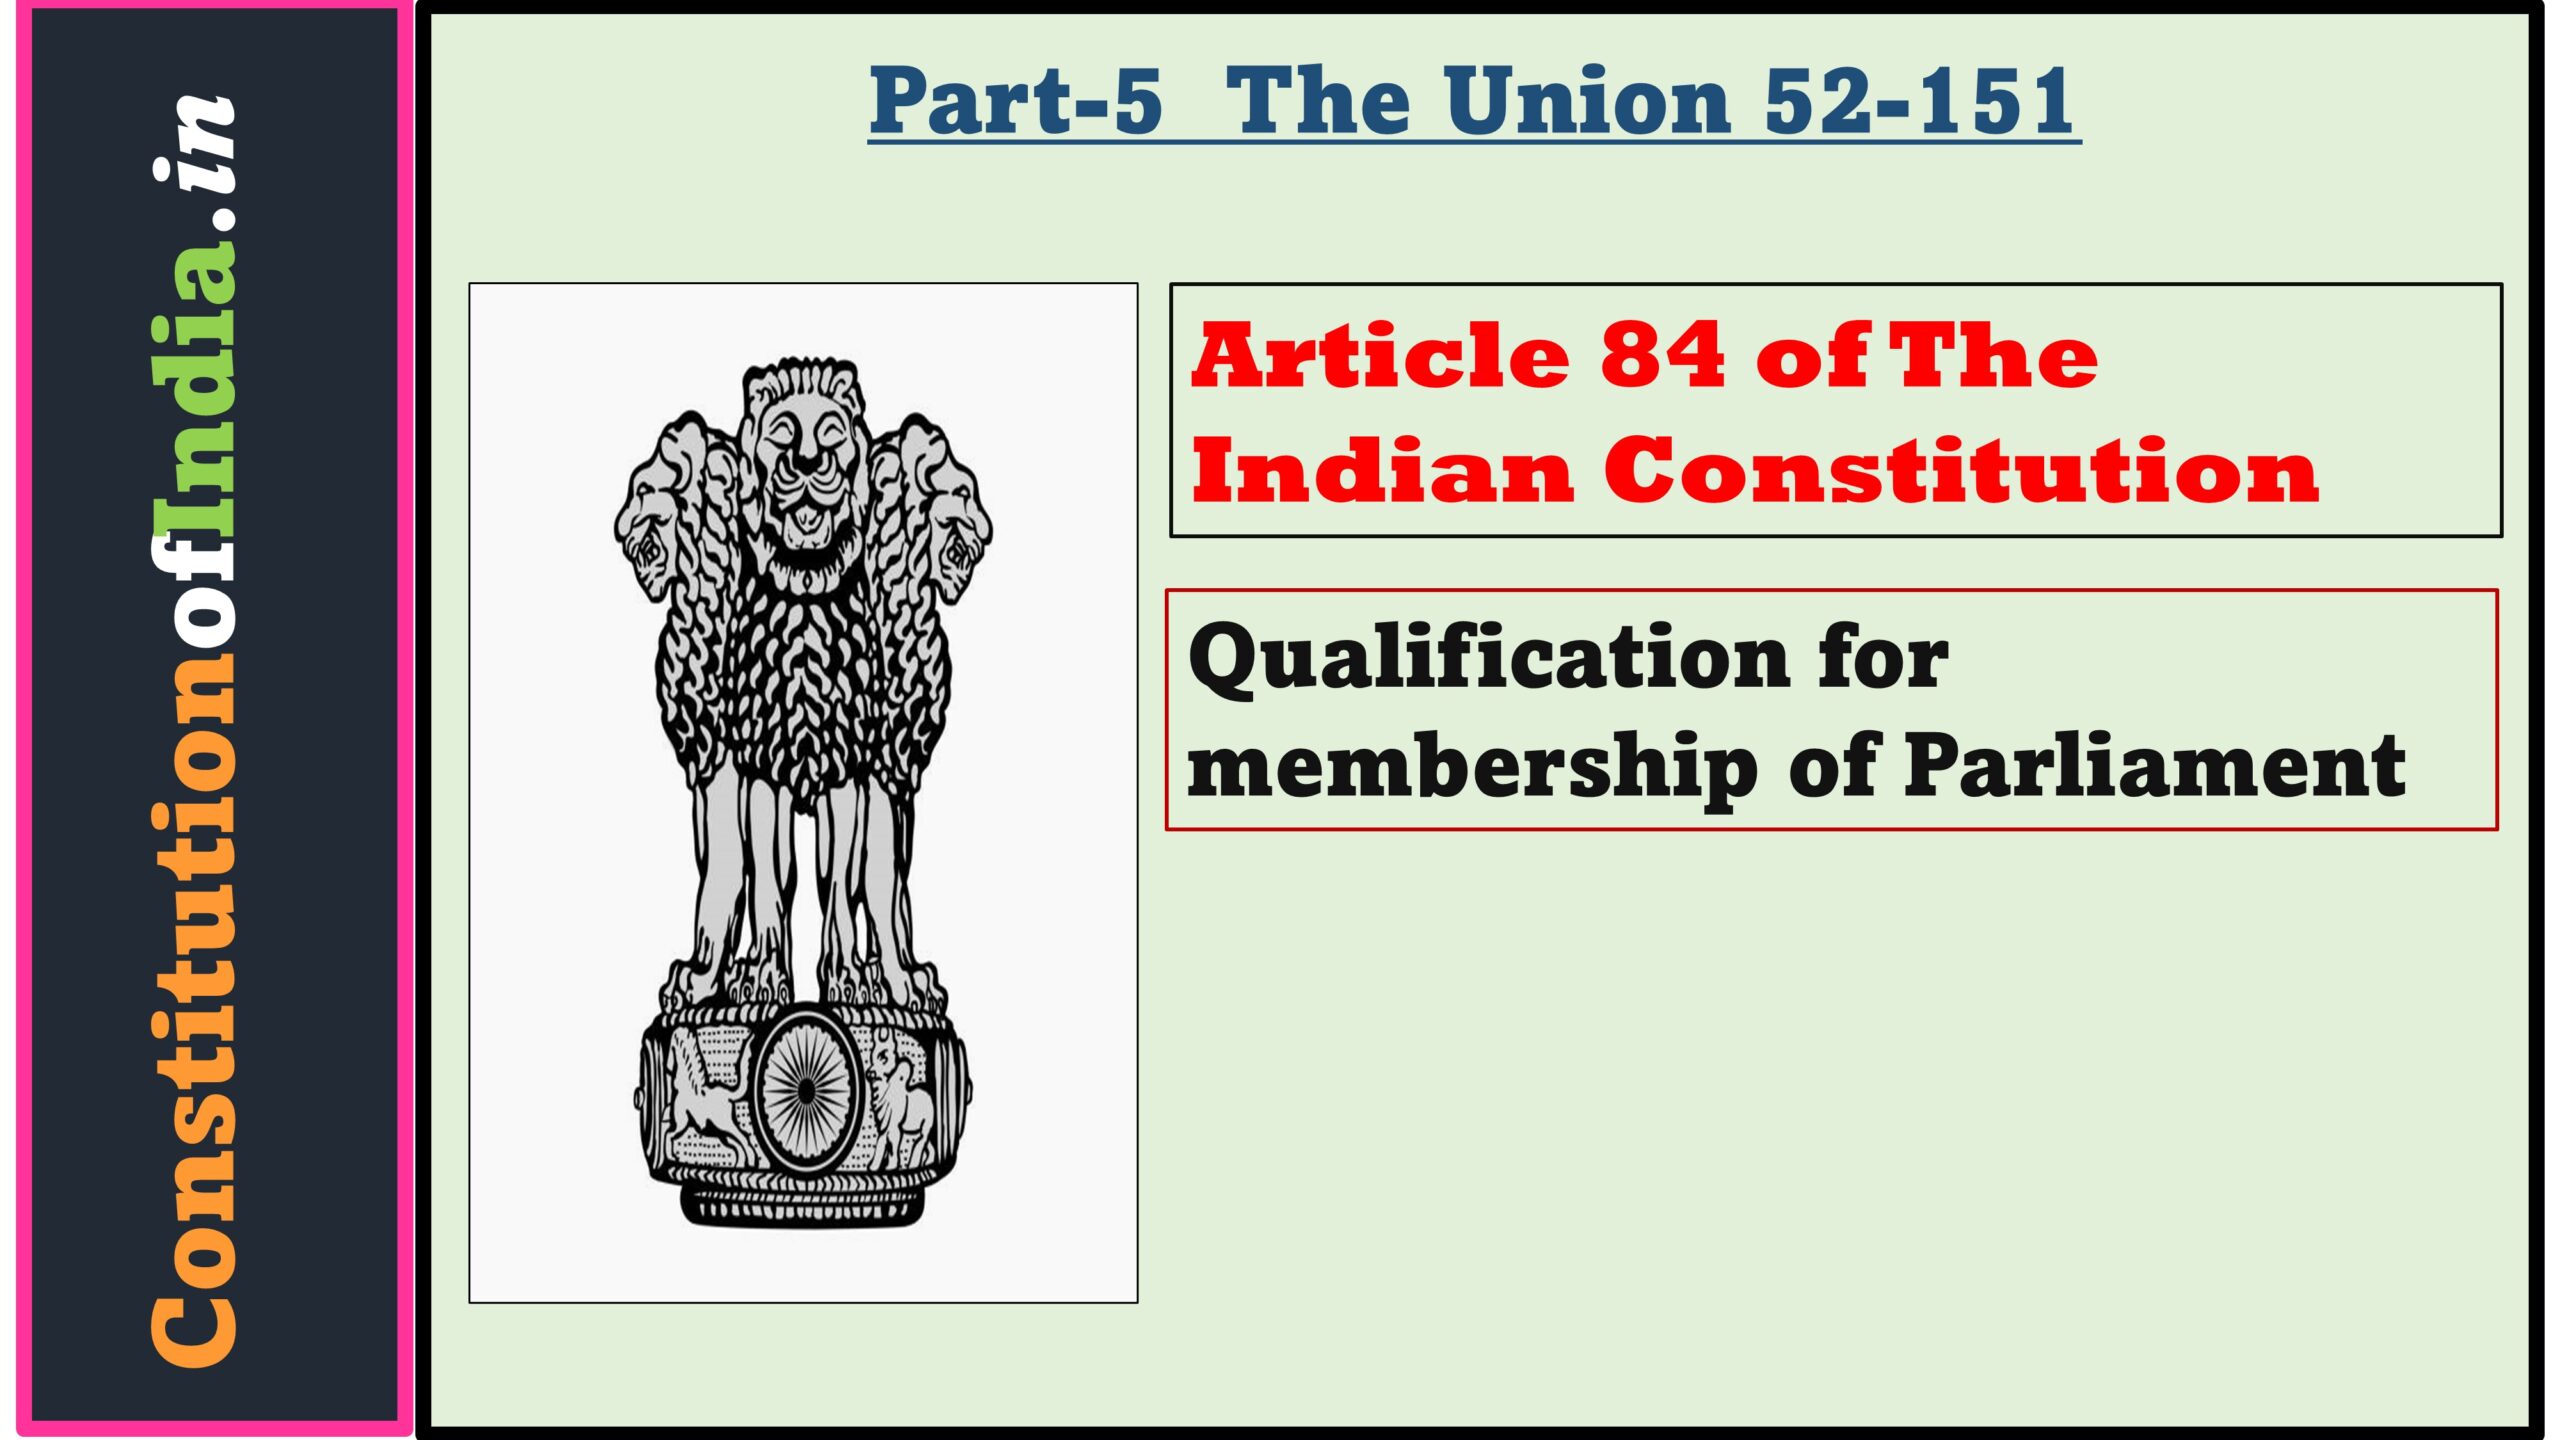 Article 84 of The Indian Constitution